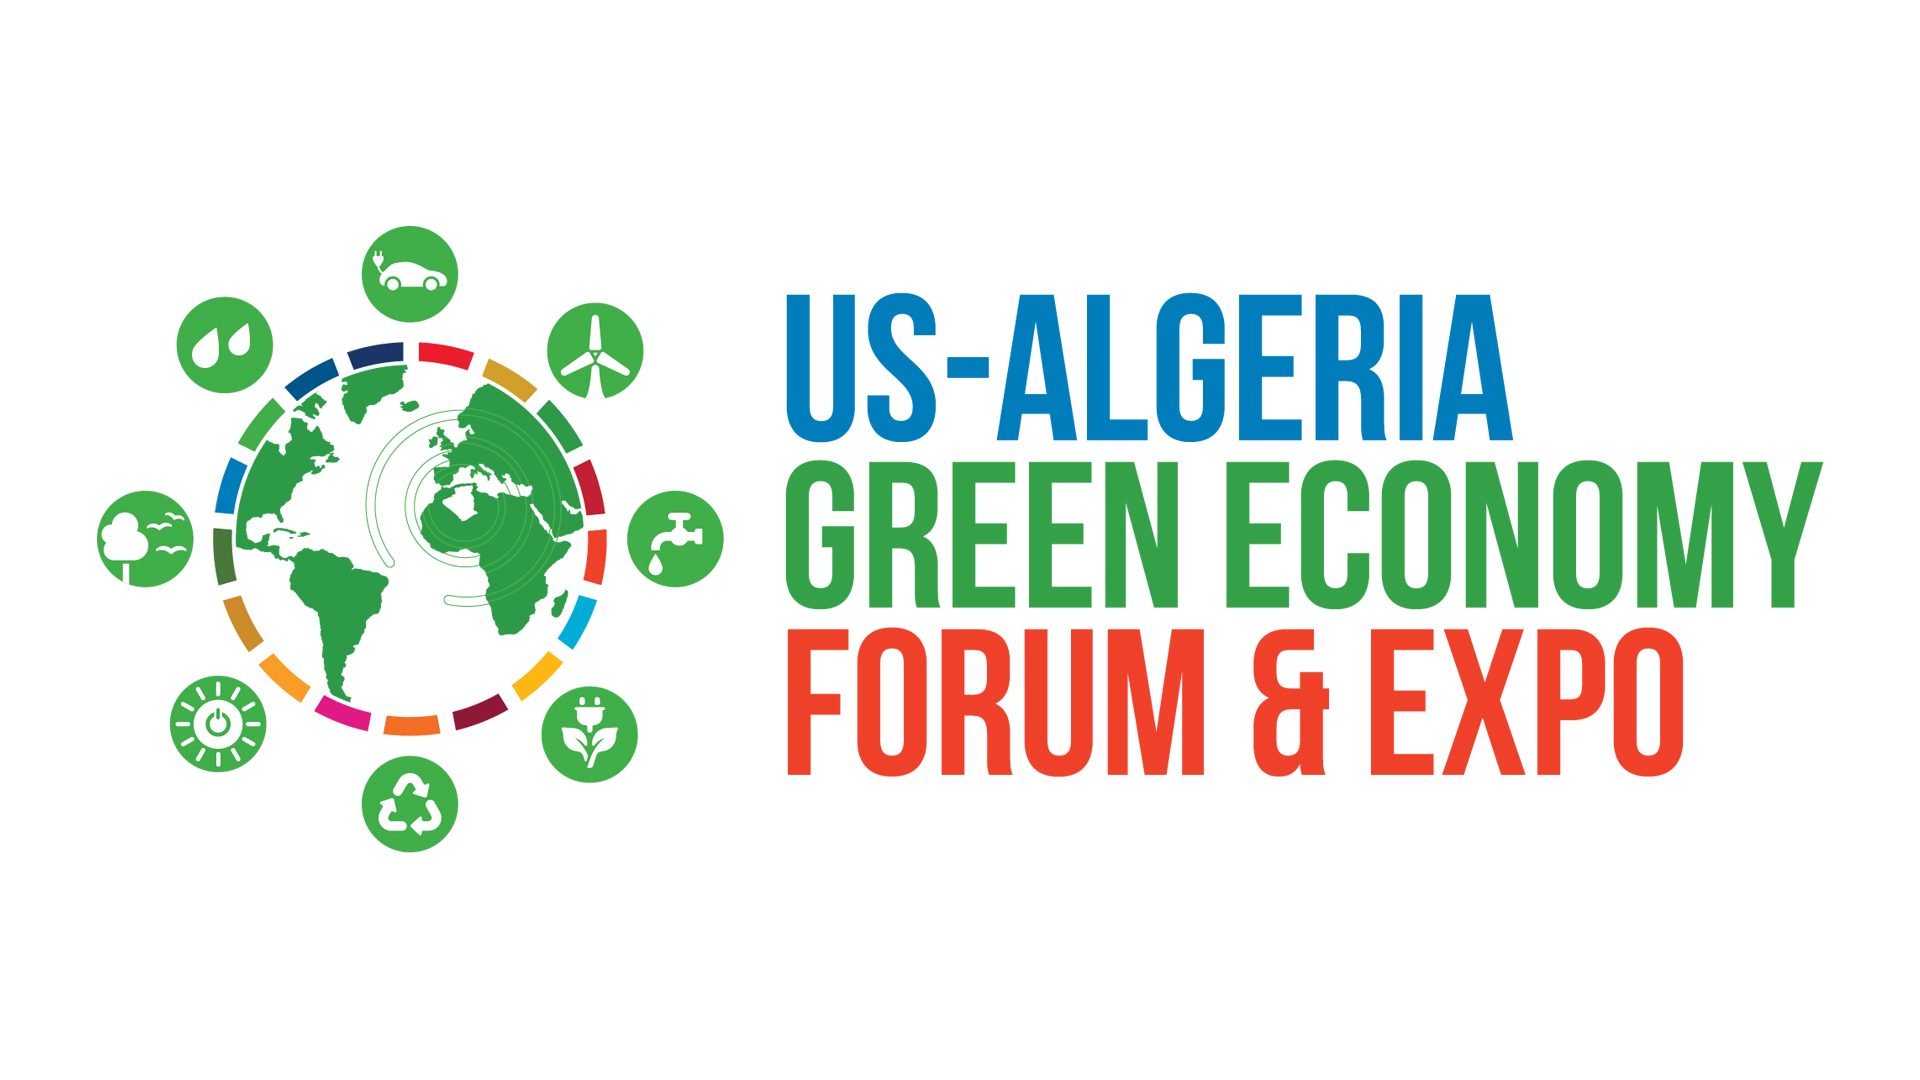 US Algeria Green Economy Forum and Expo with blue, green, red text color and green earth graphic